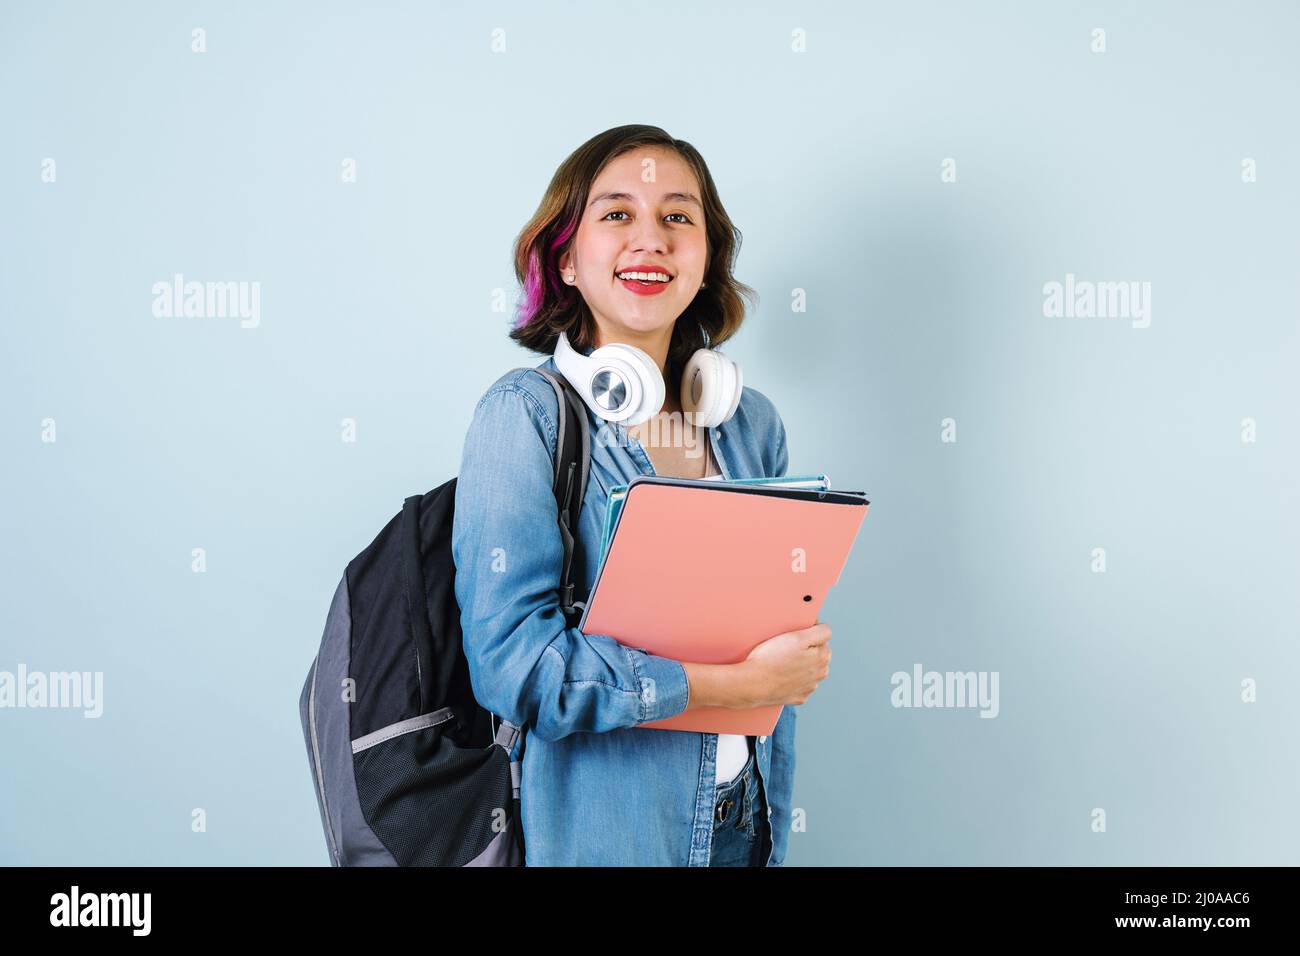 Young Hispanic student woman wearing backpack and holding books over isolated blue background Stock Photo